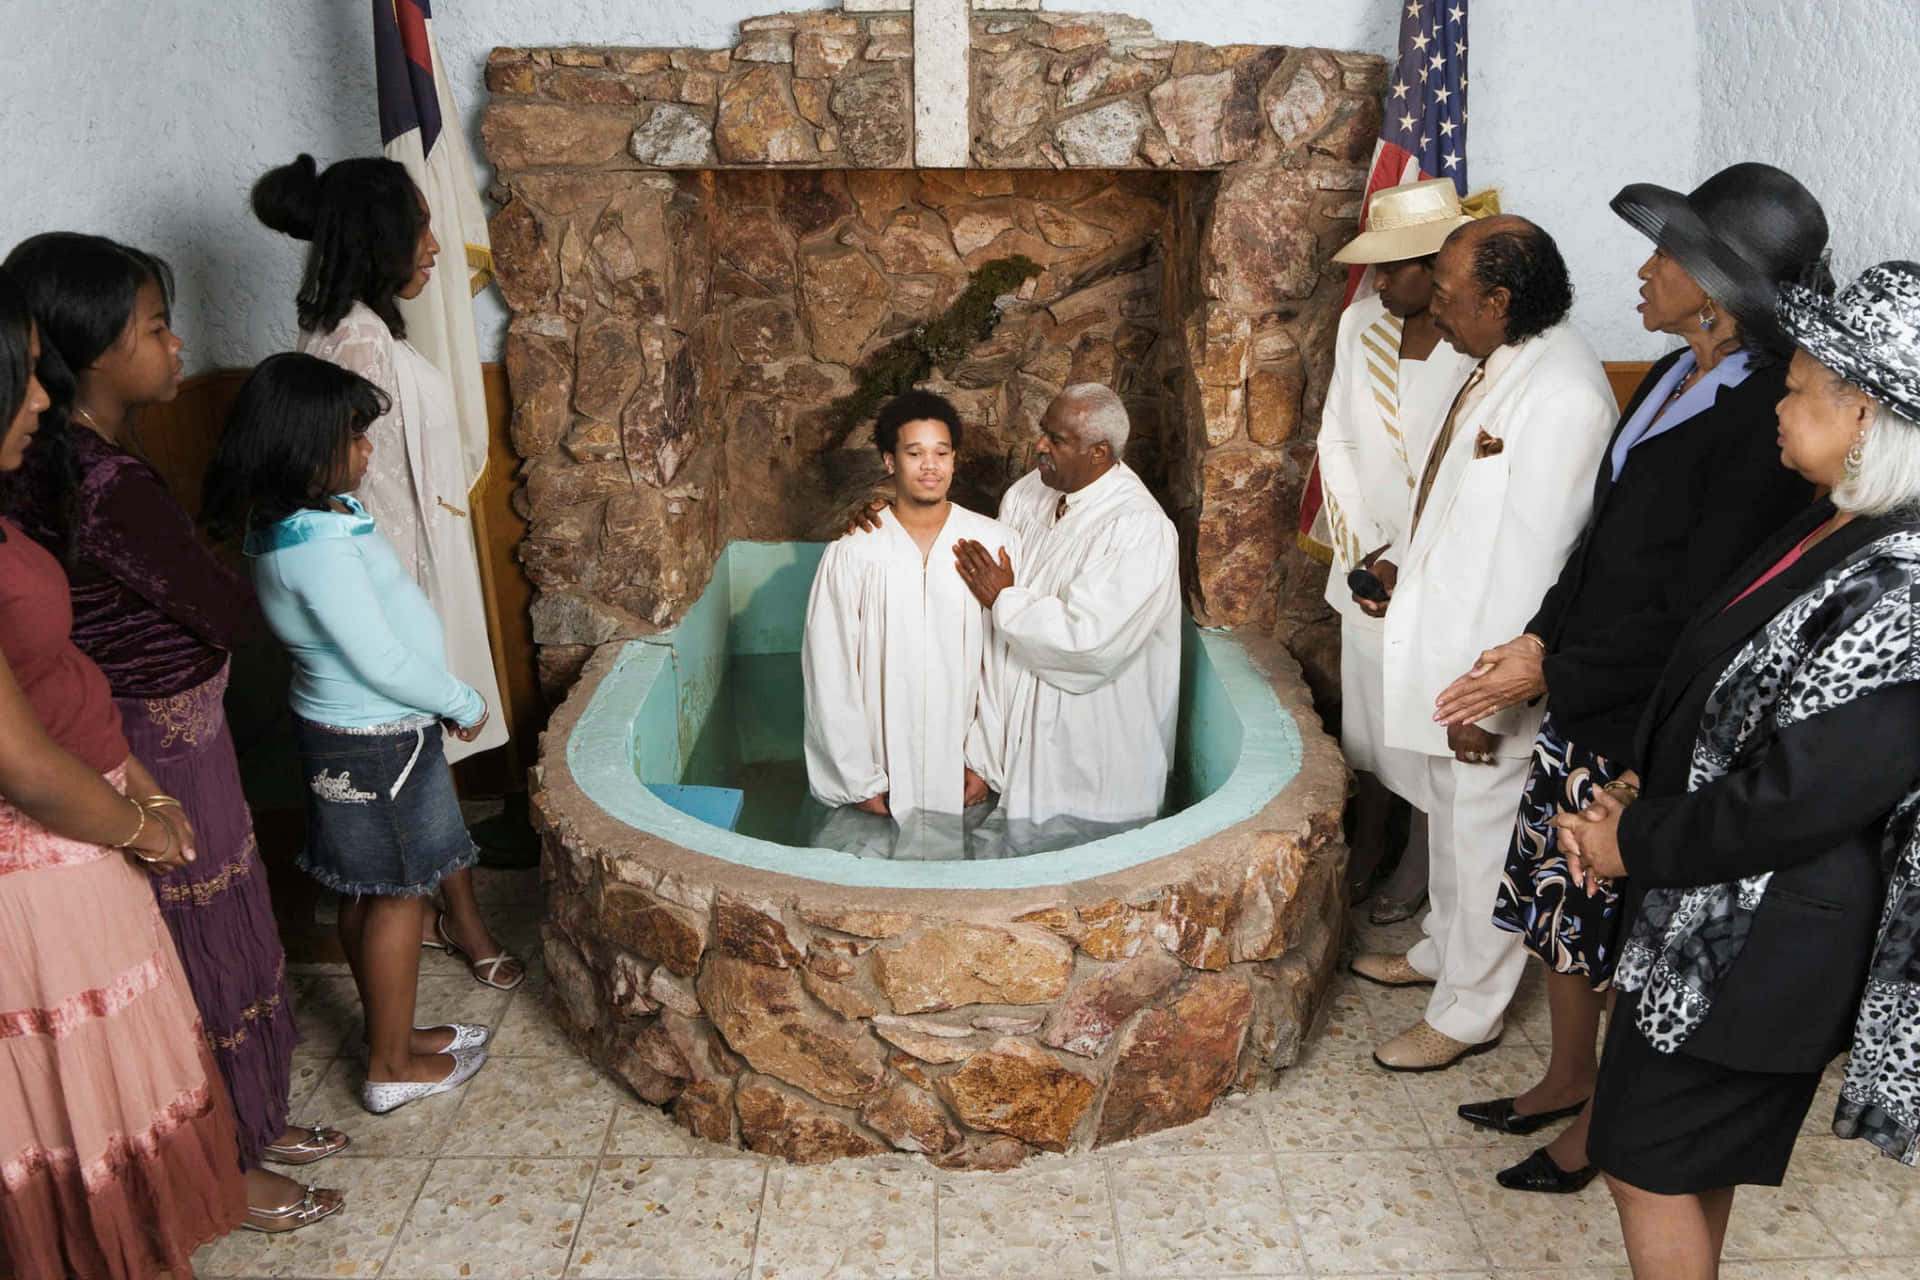 A Group Of People Standing Around A Stone Bathtub